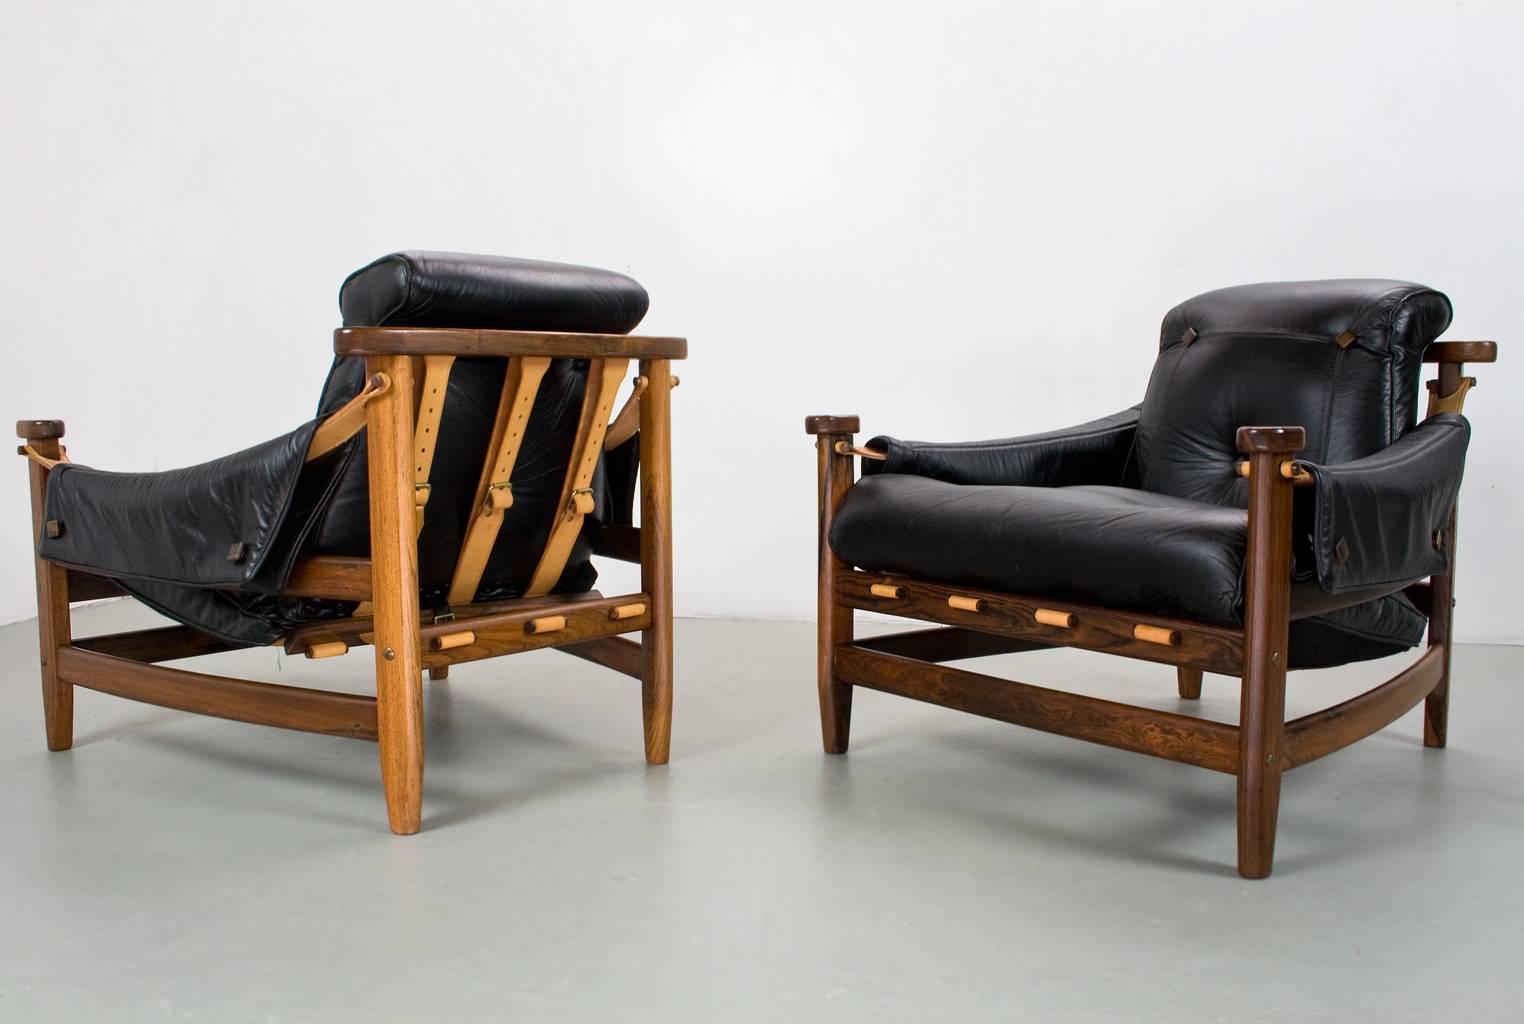 Brazilian modern yet almost brutalist design with great attention for detail, this set of 'Bertioga' lounge chairs was designed by Jean Gillon in the 60s and they are truly an eye catcher in any home. The black leather is beautifully stitched and in